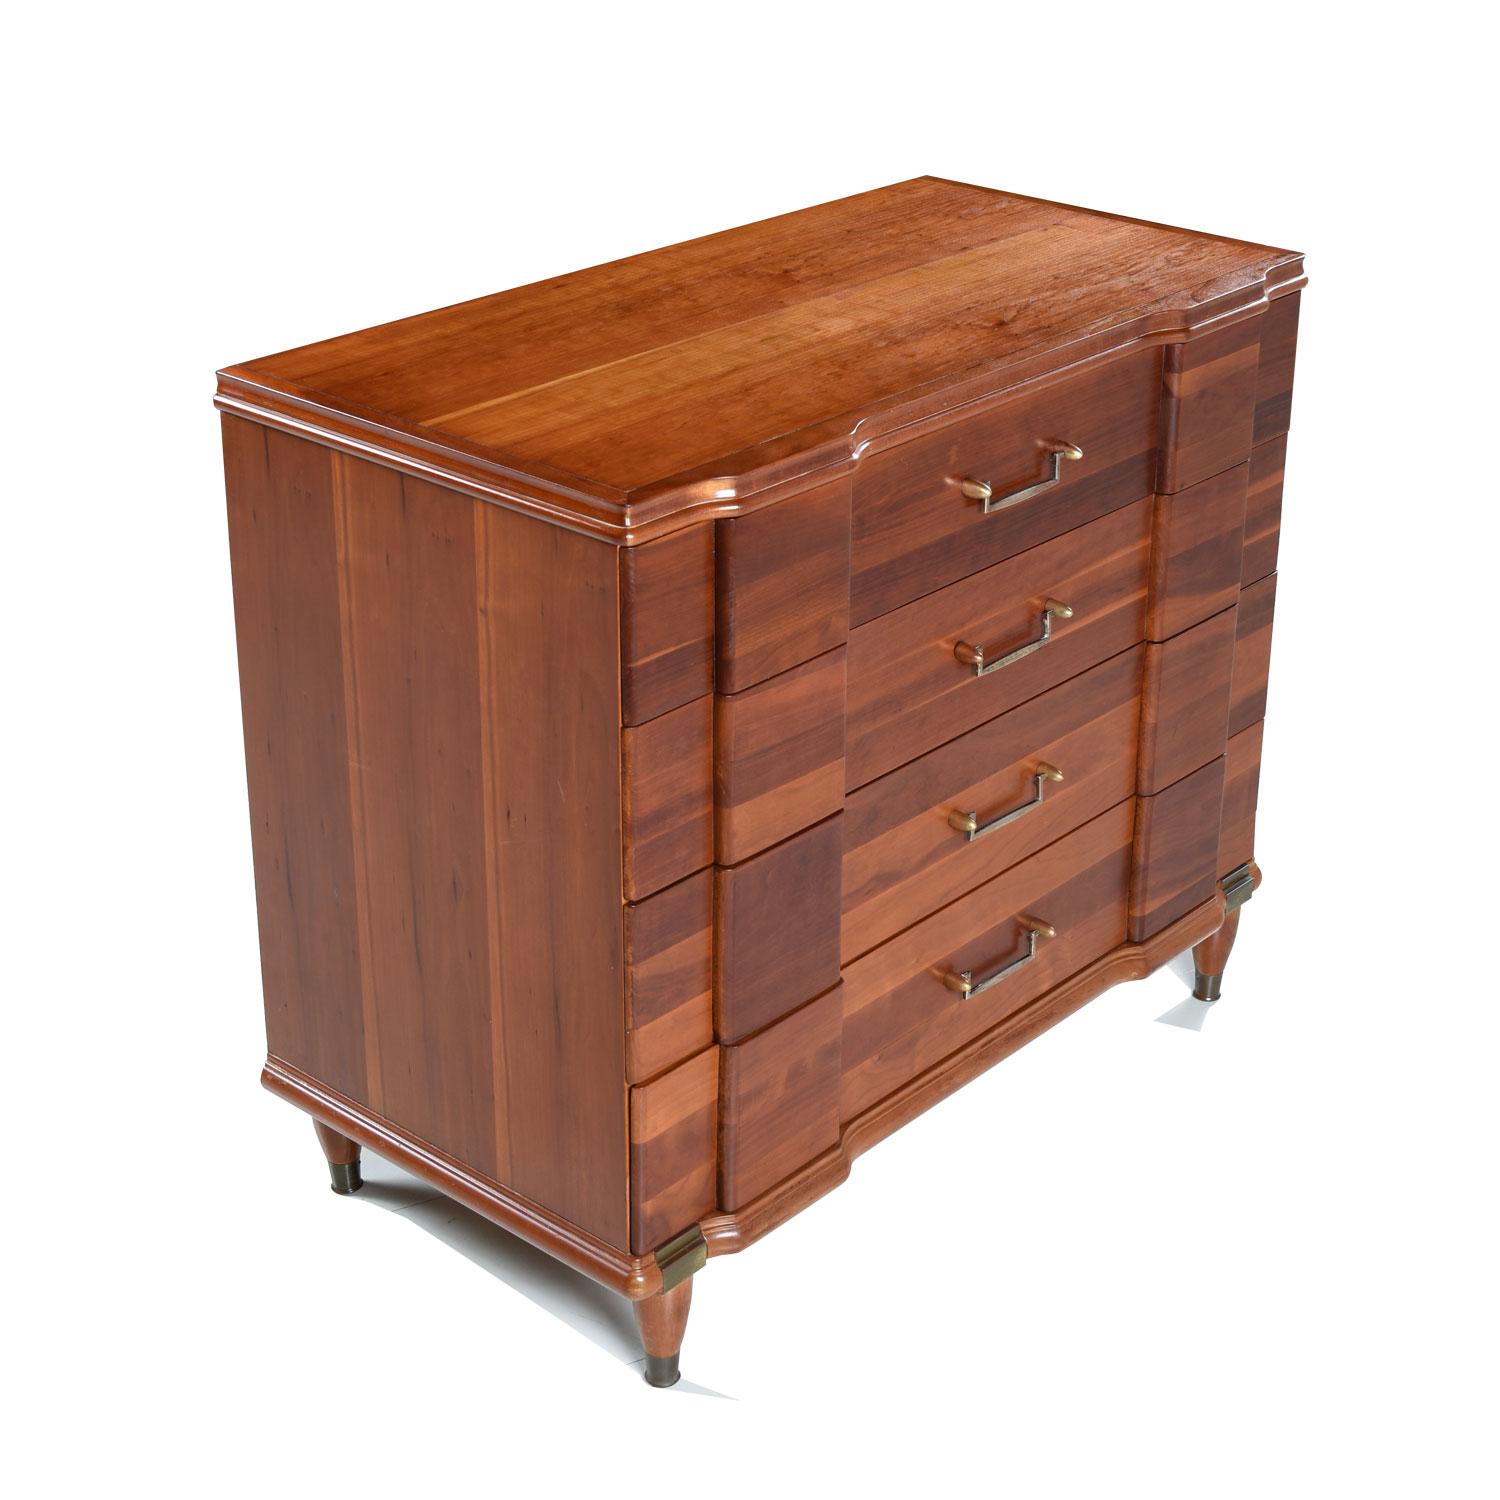 Machine Age Cherry Bachelors Chest by Hickory MFG with Brass Bullet Shaped Handles